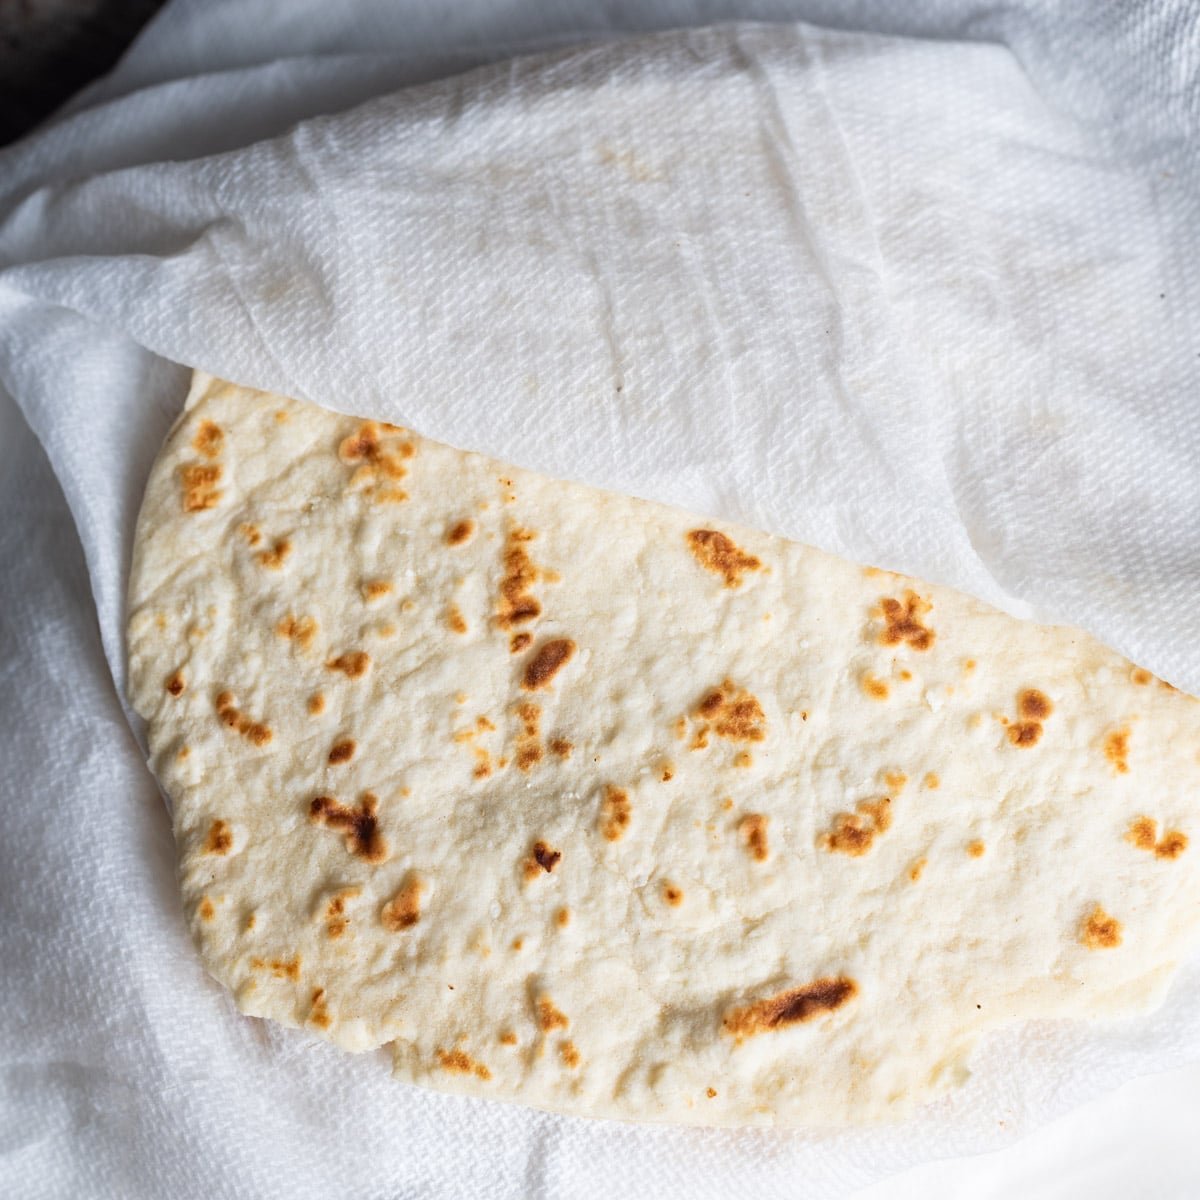 cooked flour tortillas in damp paper towels